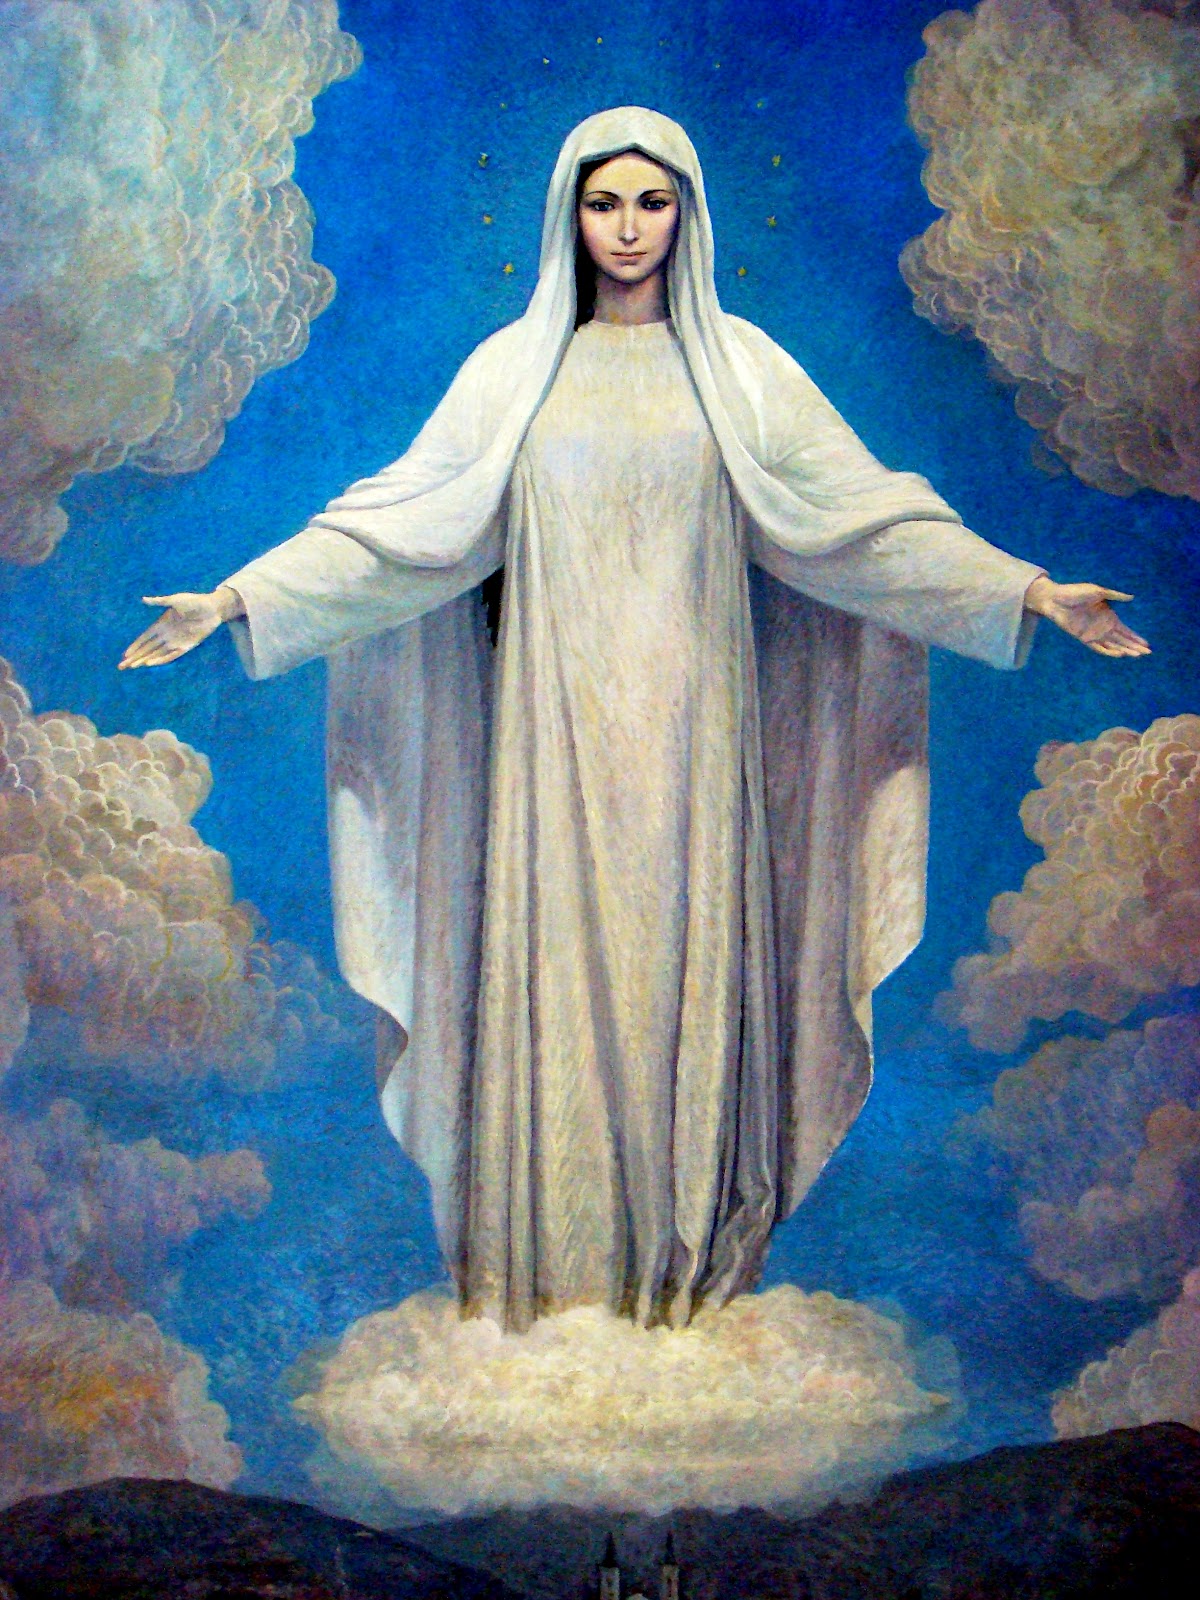 Queen of Peace: The Medjugorje Story.